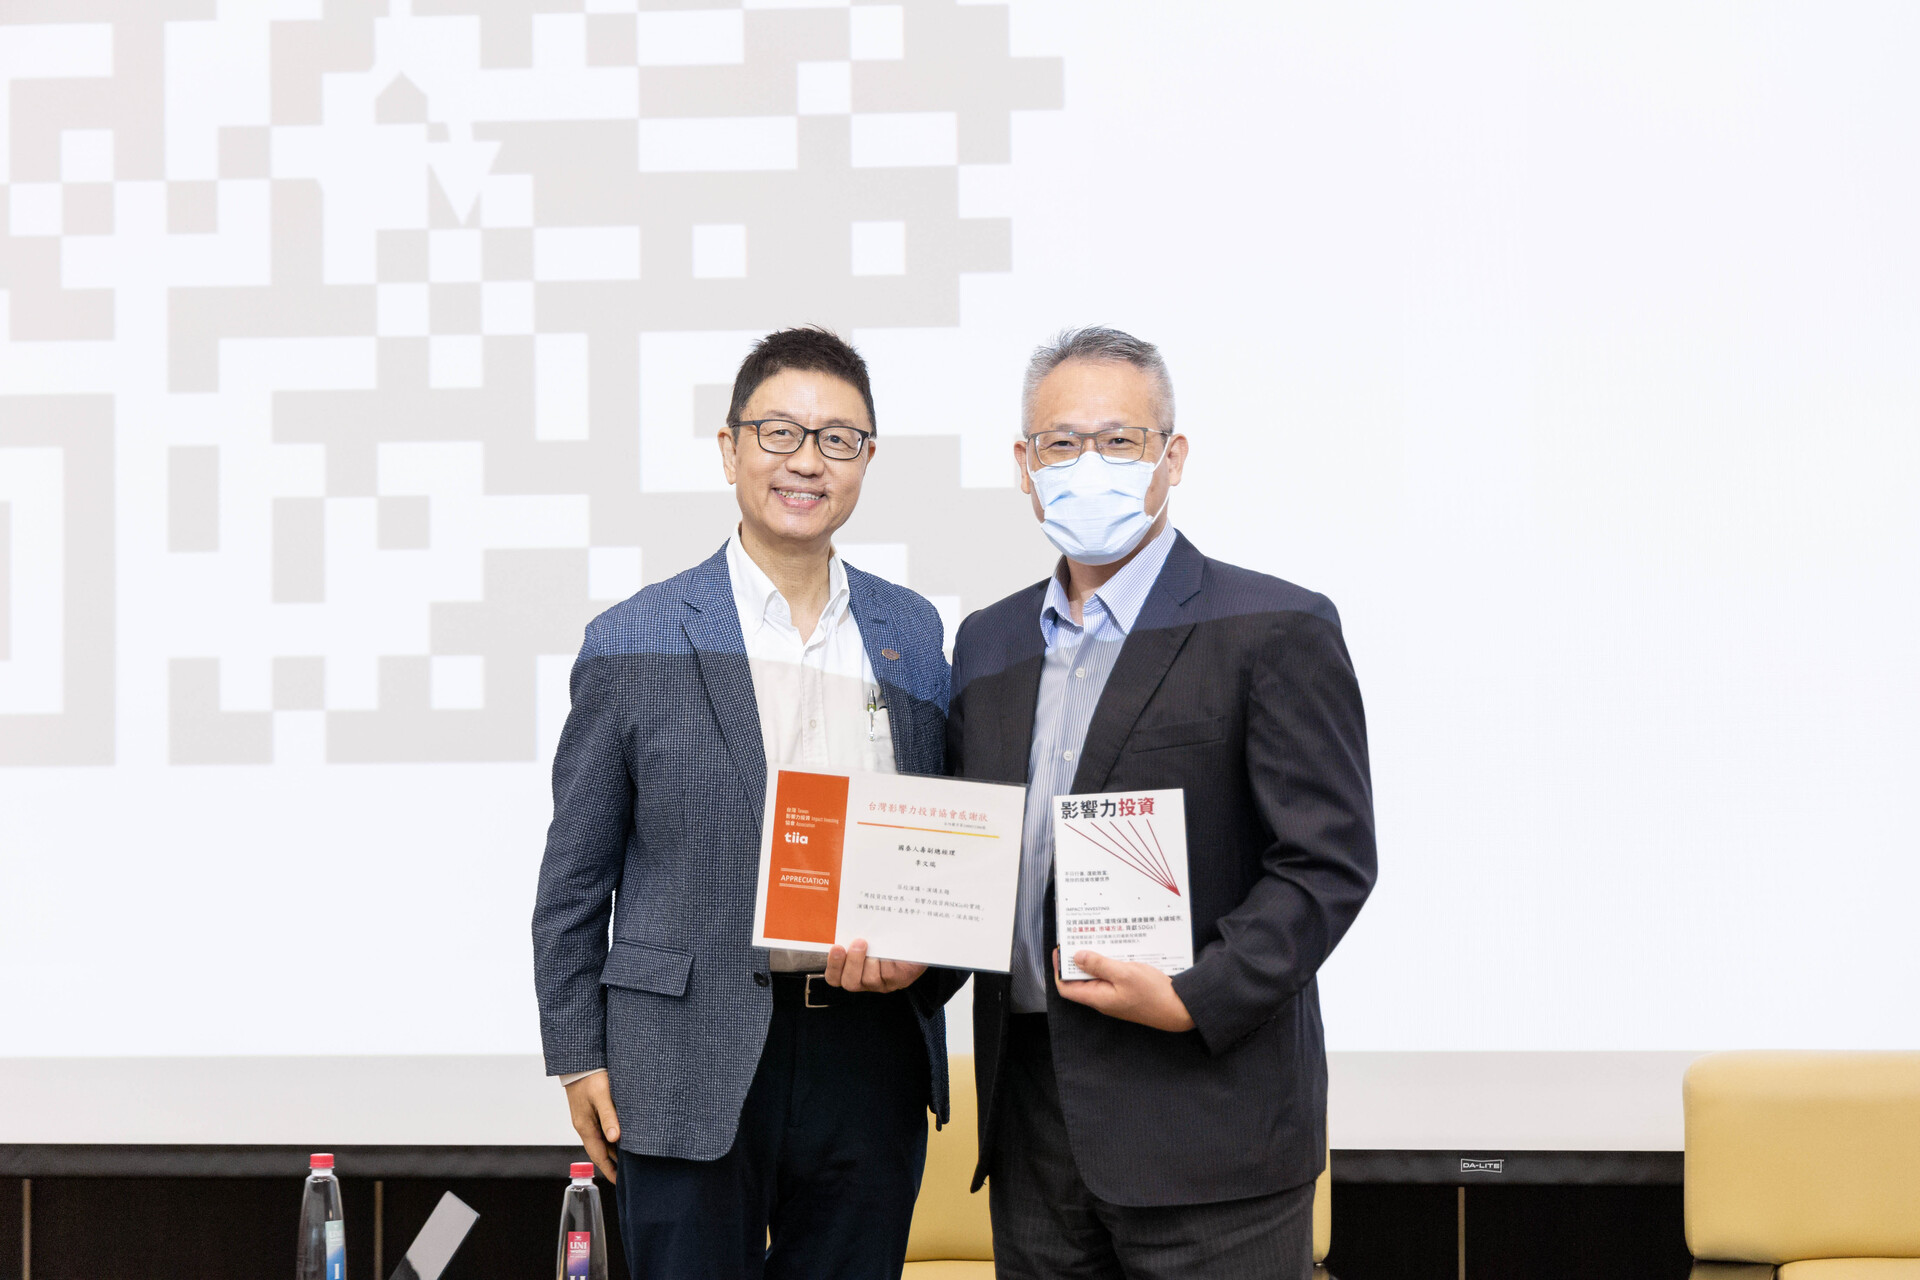 CEO of Taiwan Impact Investing Association Tao-kuei Wu awards a certificate of appreciation and presents a book to Vice President of Cathay Life Wen-Jui Li